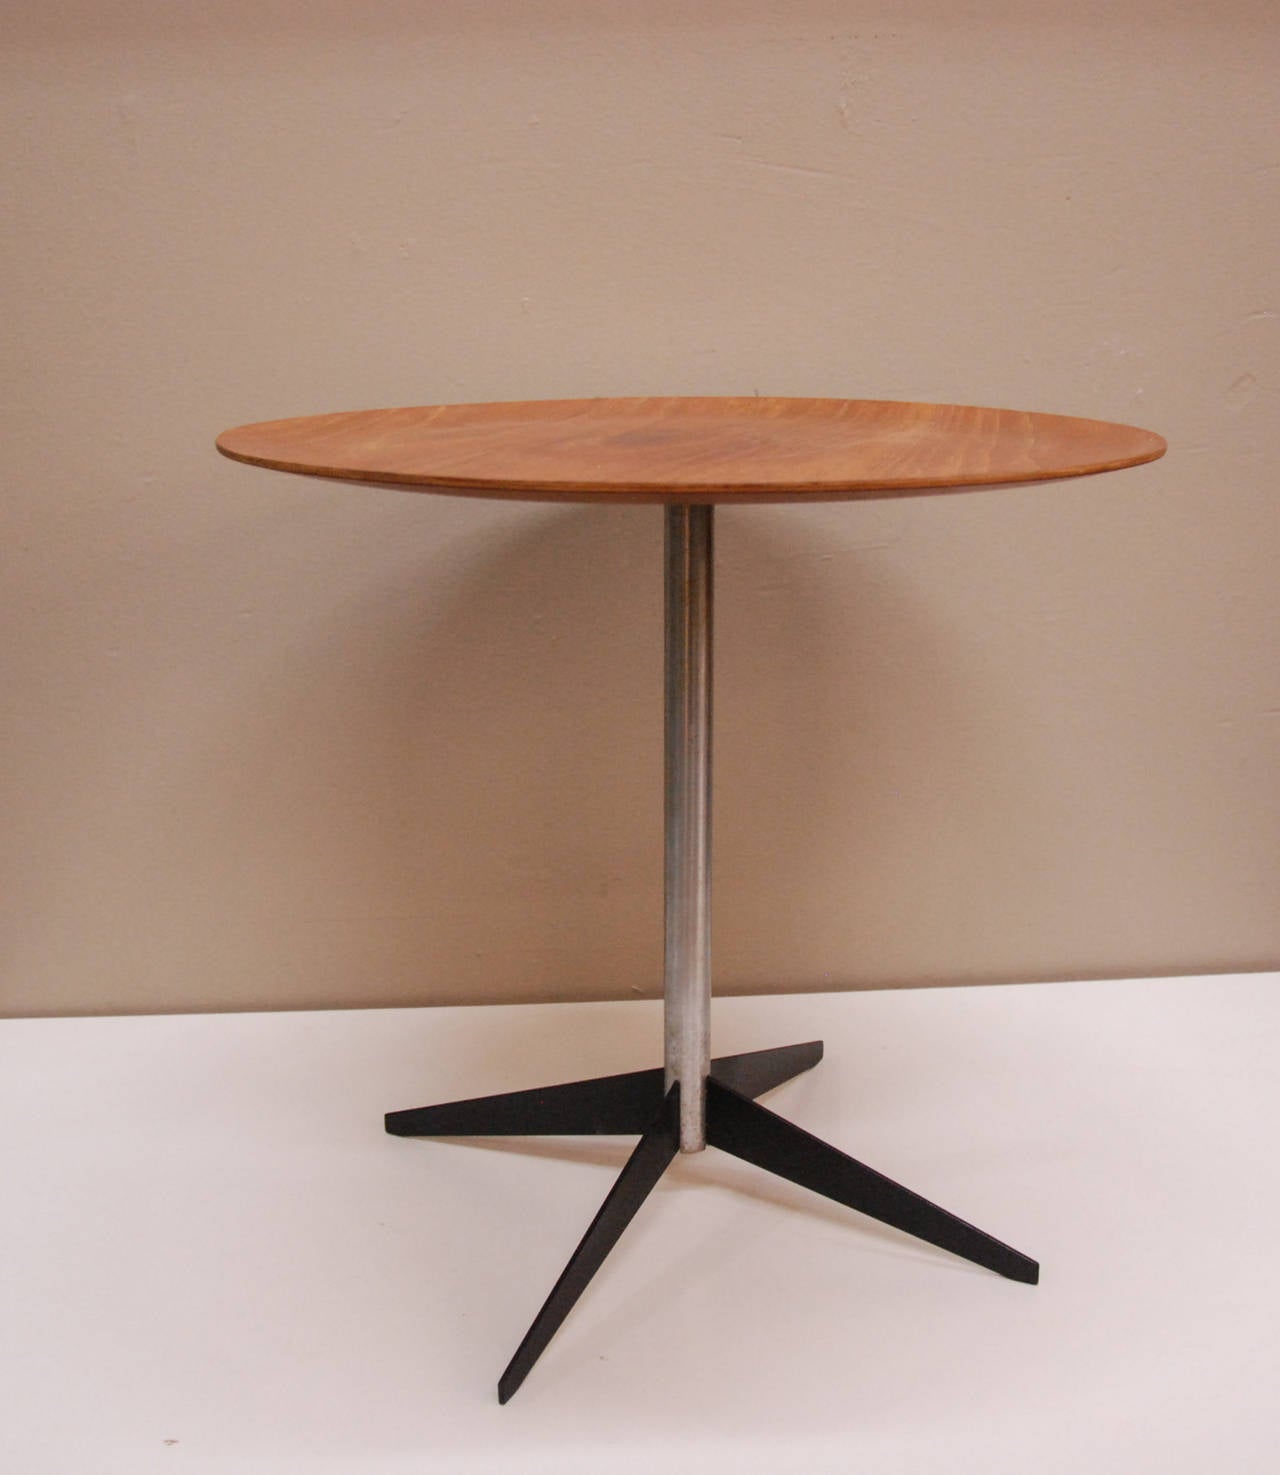 A rare George Nelson Associates walnut ply,  polished and enameled steel tray table for Herman Miller Furniture Company.